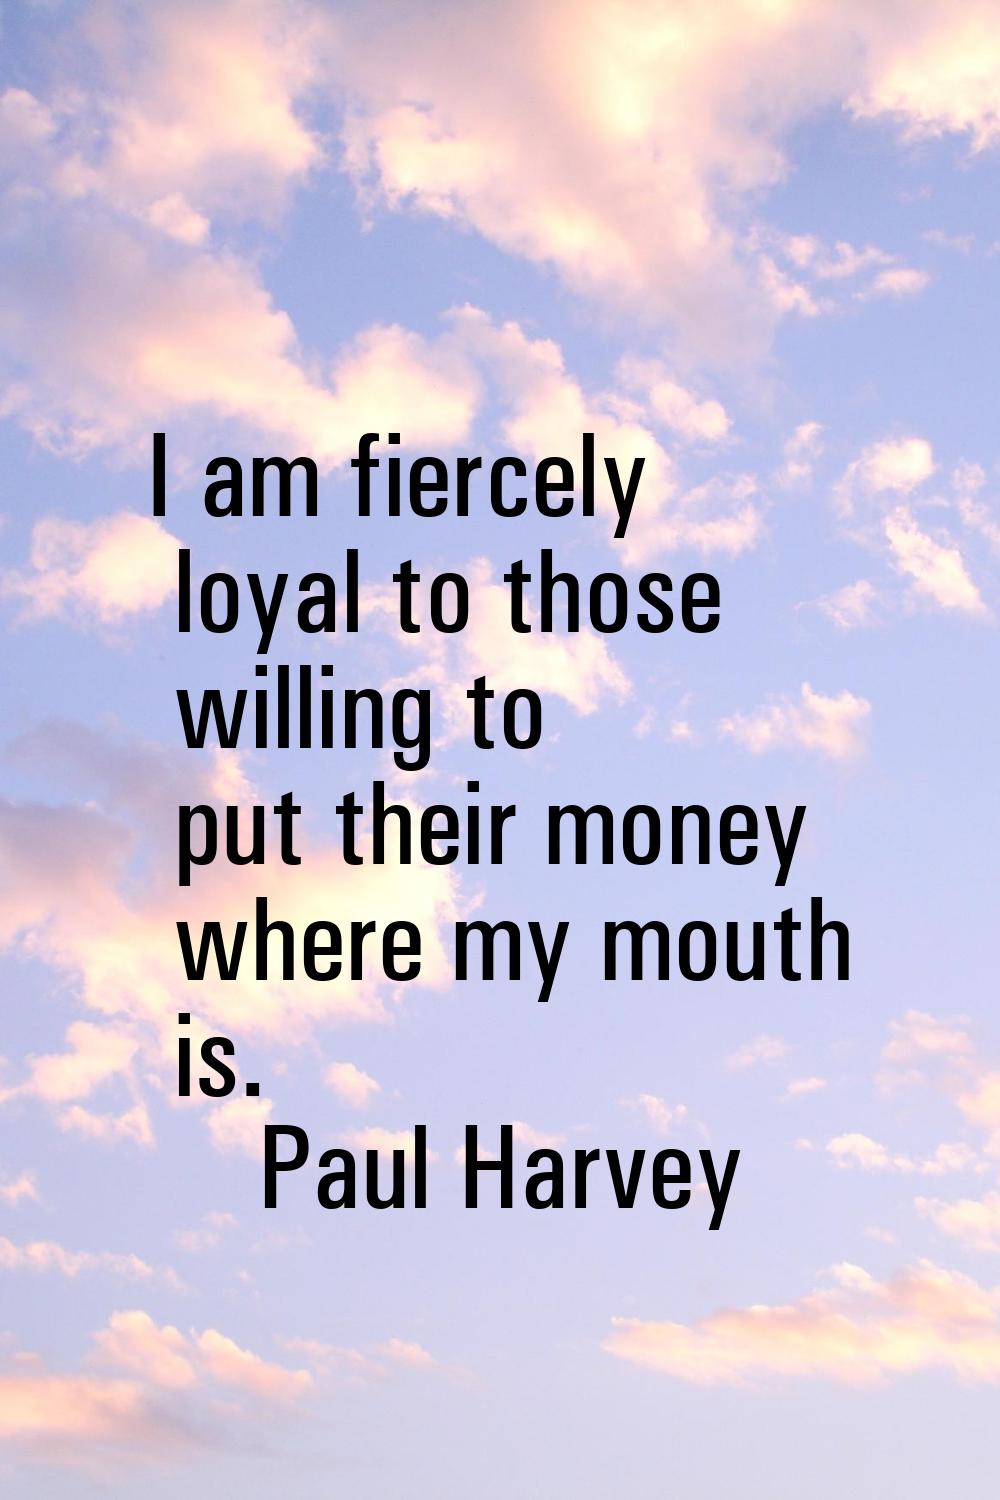 I am fiercely loyal to those willing to put their money where my mouth is.